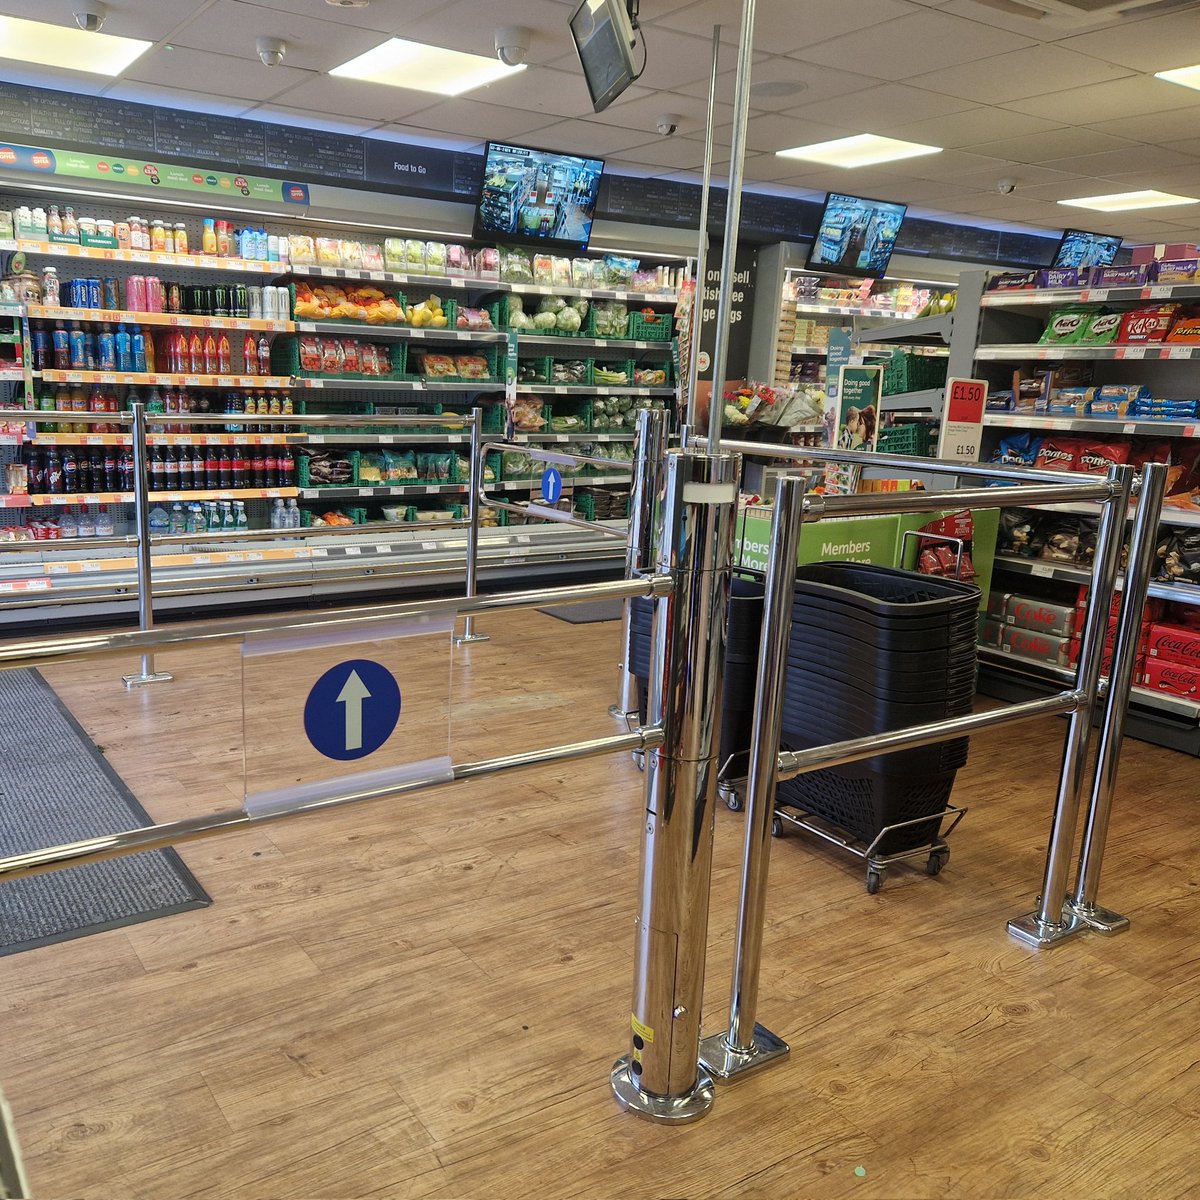 🗨👮🏻‍♂️ Whilst visiting some of the retailers on our neighbourhood it was great to see some recent changes implemented to the store layout with attempts to prevent shop thefts and business crime. 🛒🍶 Just like your home security we like to see stores making it harder for them.